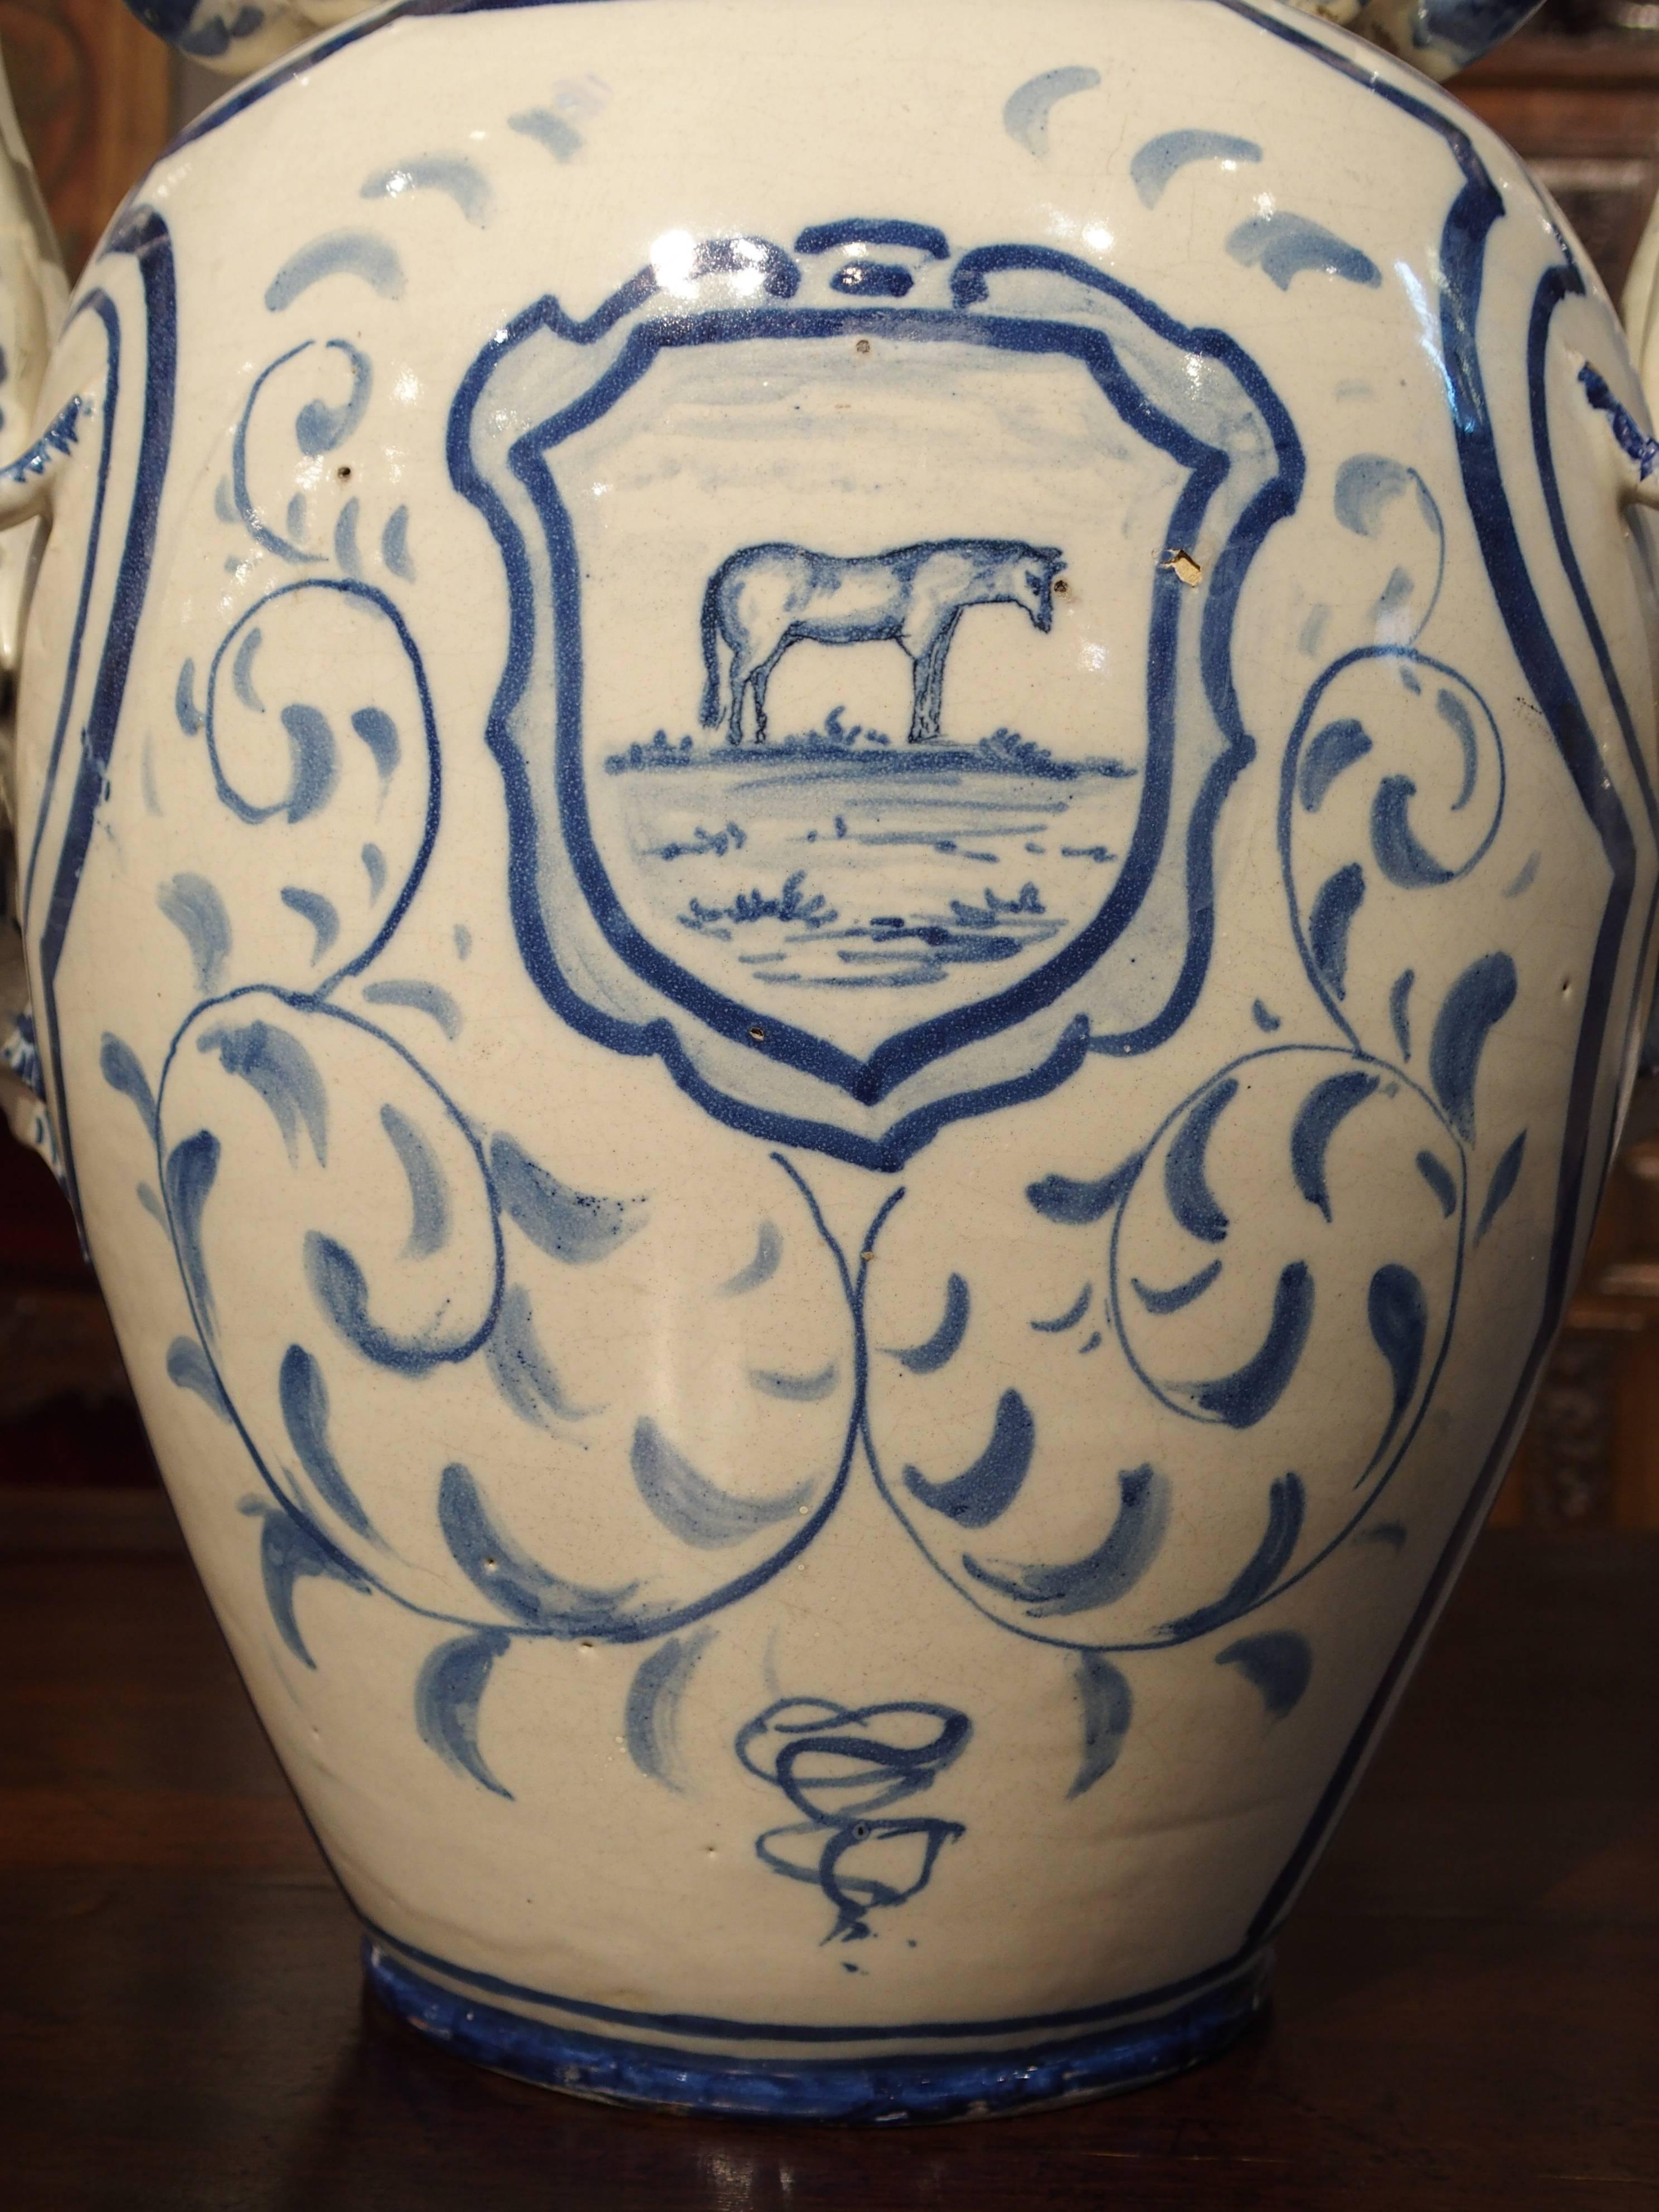 Savona pottery is famous above all for its characteristic blue and white colors, known as 